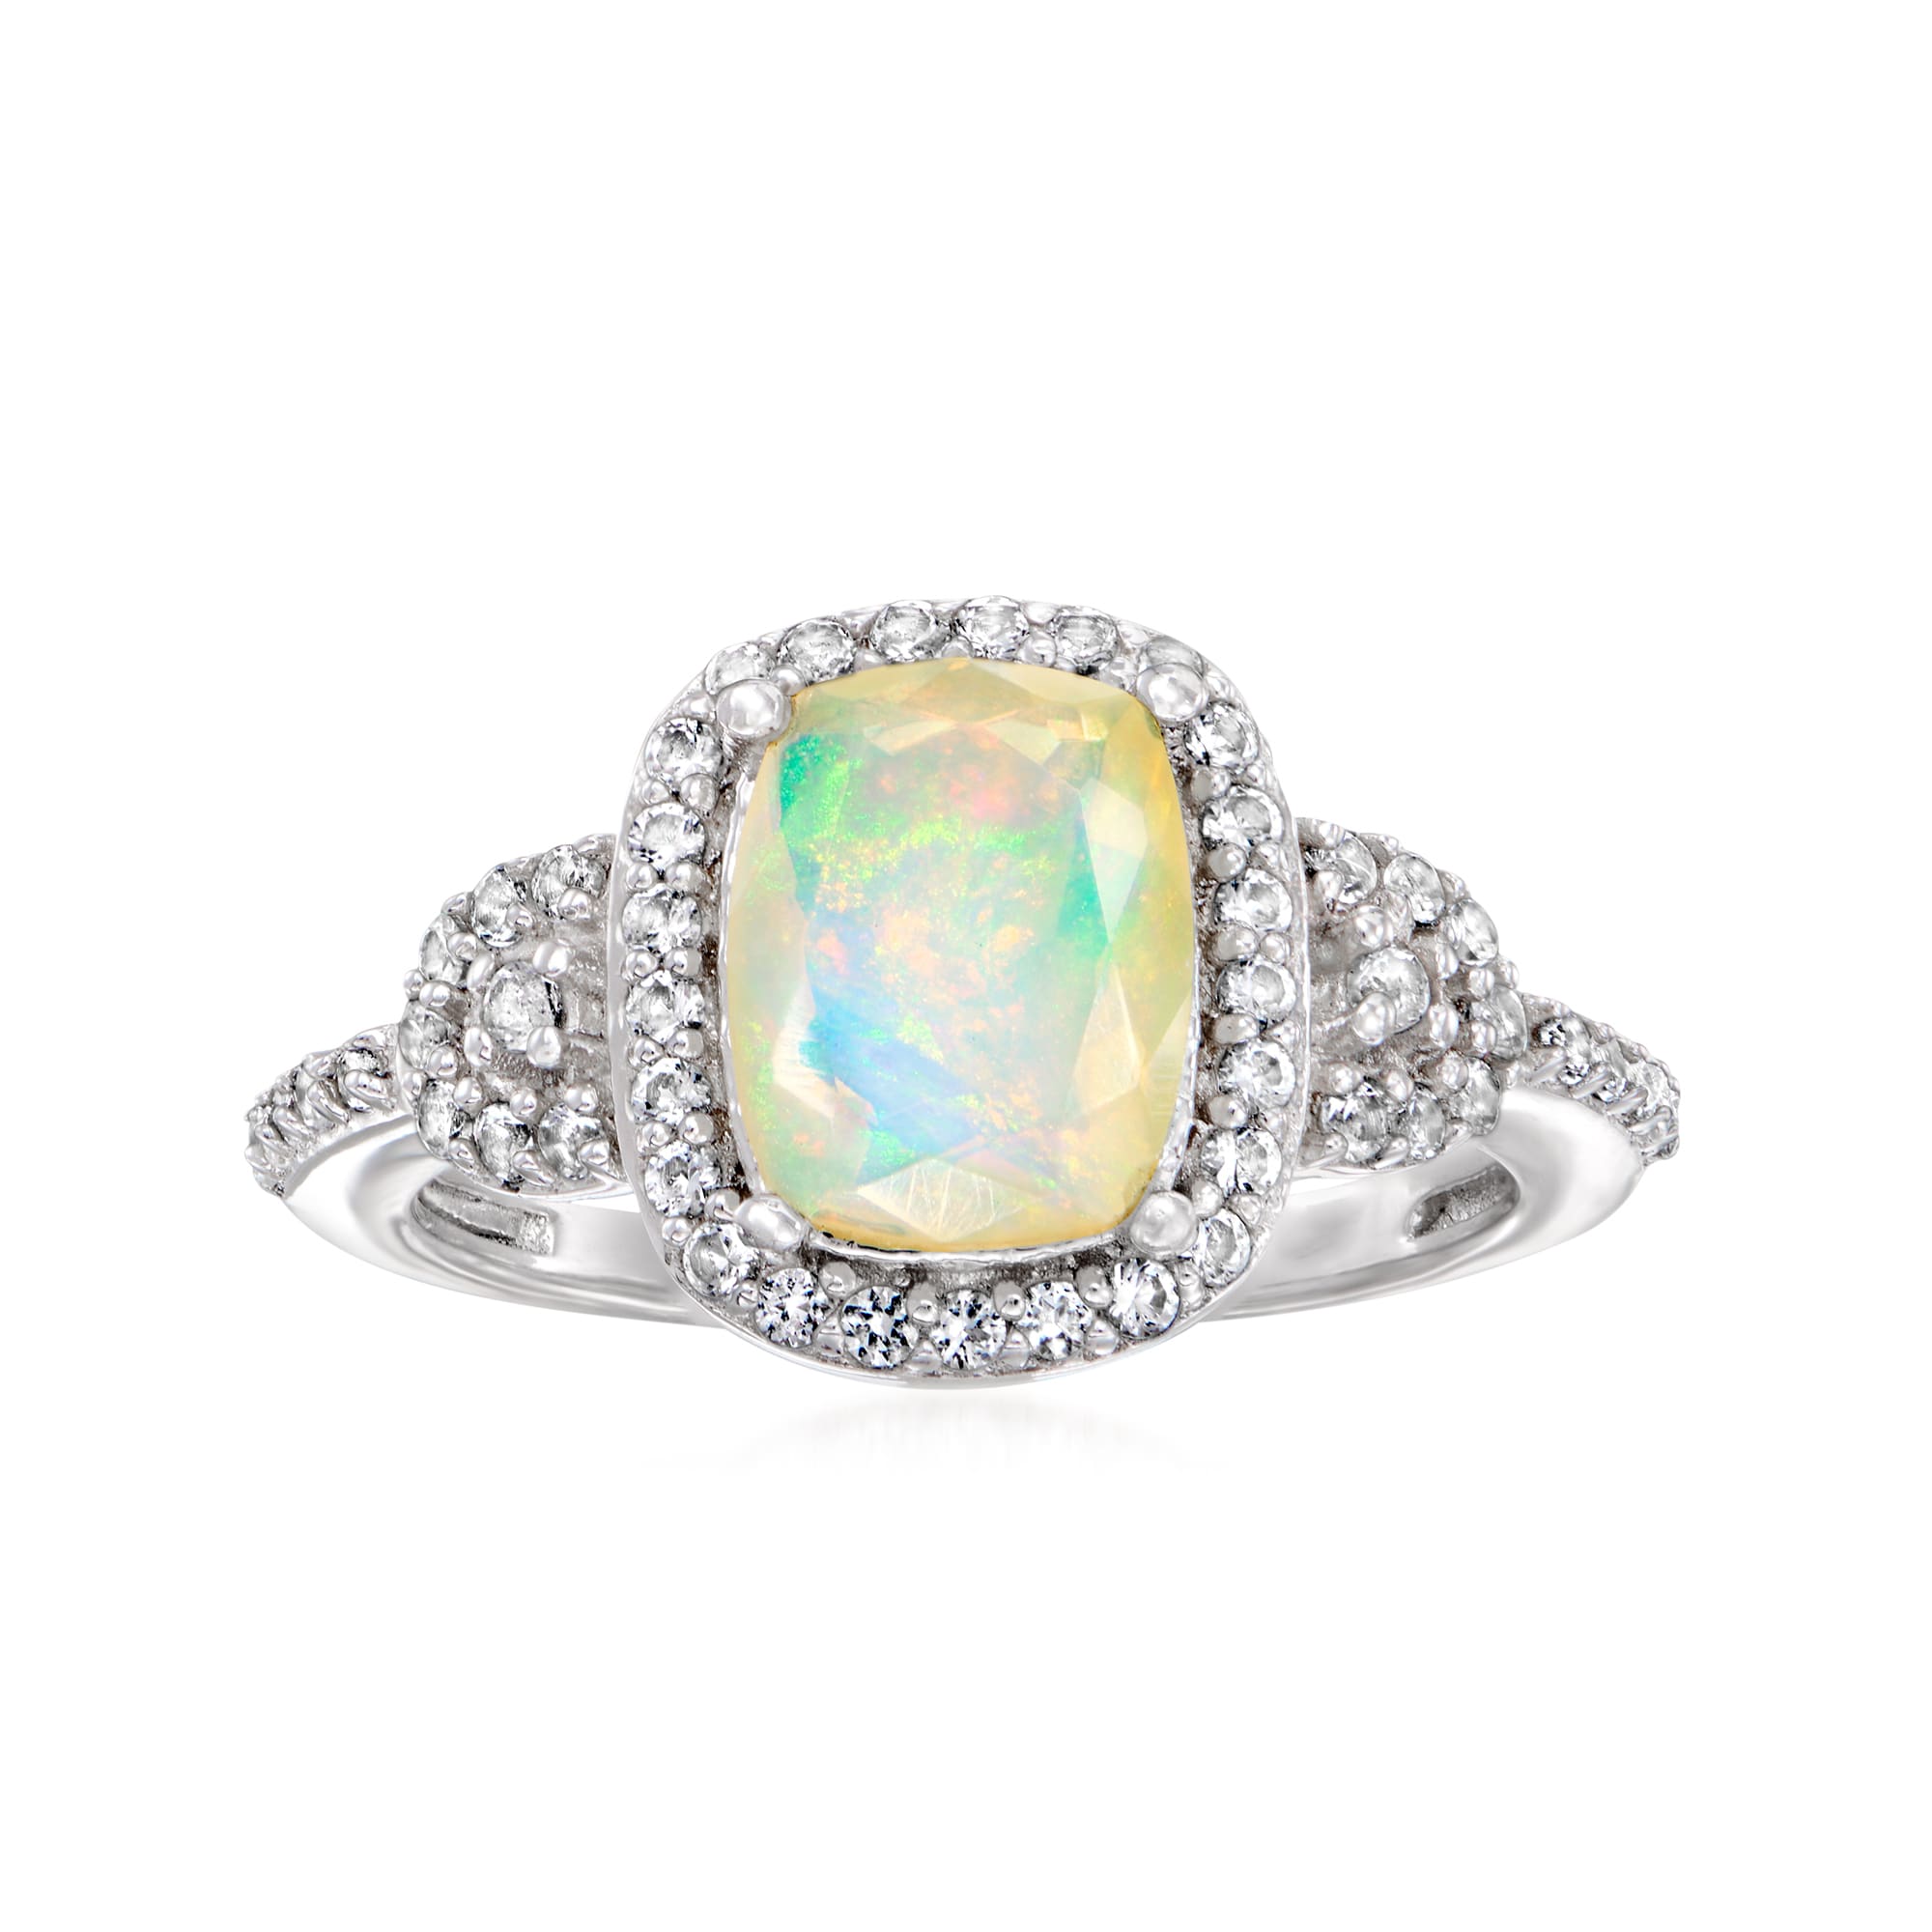 Opal and .22 ct. t.w. White Topaz Ring in Sterling Silver | Ross-Simons